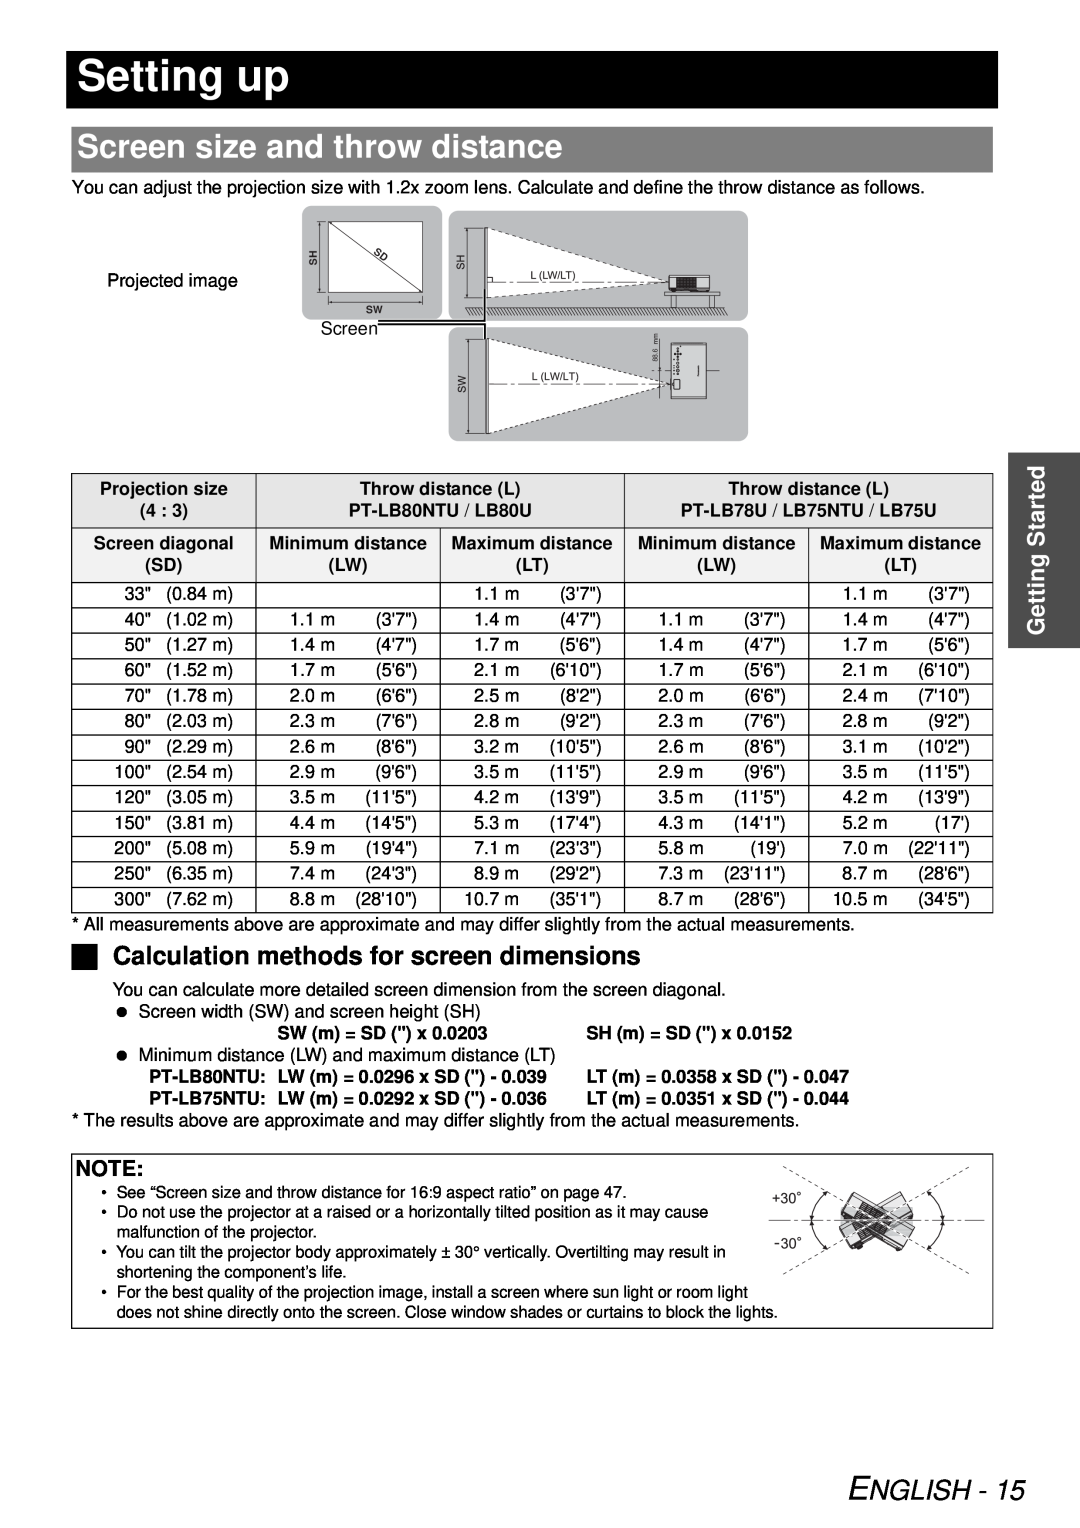 Panasonic PT-LB78U Setting up, Screen size and throw distance, Calculation methods for screen dimensions, Started, English 